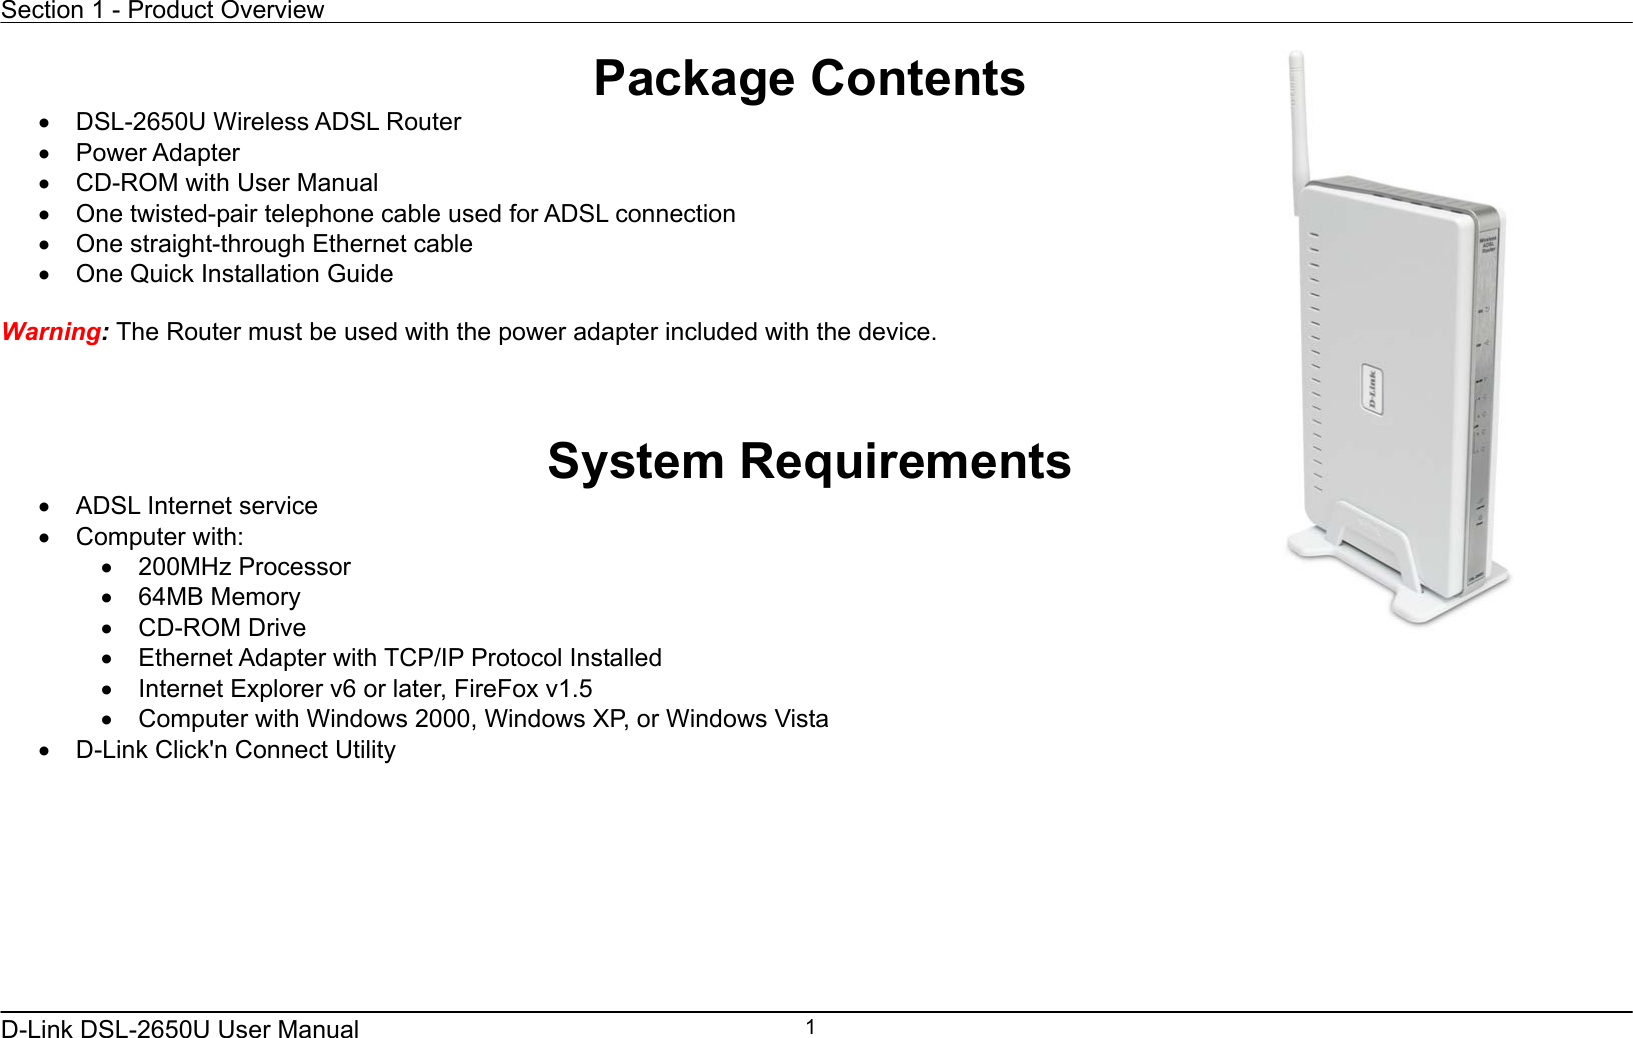 Section 1 - Product Overview  D-Link DSL-2650U User Manual    1Package Contents •  DSL-2650U Wireless ADSL Router •  Power Adapter   •  CD-ROM with User Manual   •  One twisted-pair telephone cable used for ADSL connection   •  One straight-through Ethernet cable •  One Quick Installation Guide    Warning: The Router must be used with the power adapter included with the device.    System Requirements •  ADSL Internet service •  Computer with: •  200MHz Processor •  64MB Memory •  CD-ROM Drive •  Ethernet Adapter with TCP/IP Protocol Installed •  Internet Explorer v6 or later, FireFox v1.5 •  Computer with Windows 2000, Windows XP, or Windows Vista •  D-Link Click&apos;n Connect Utility  